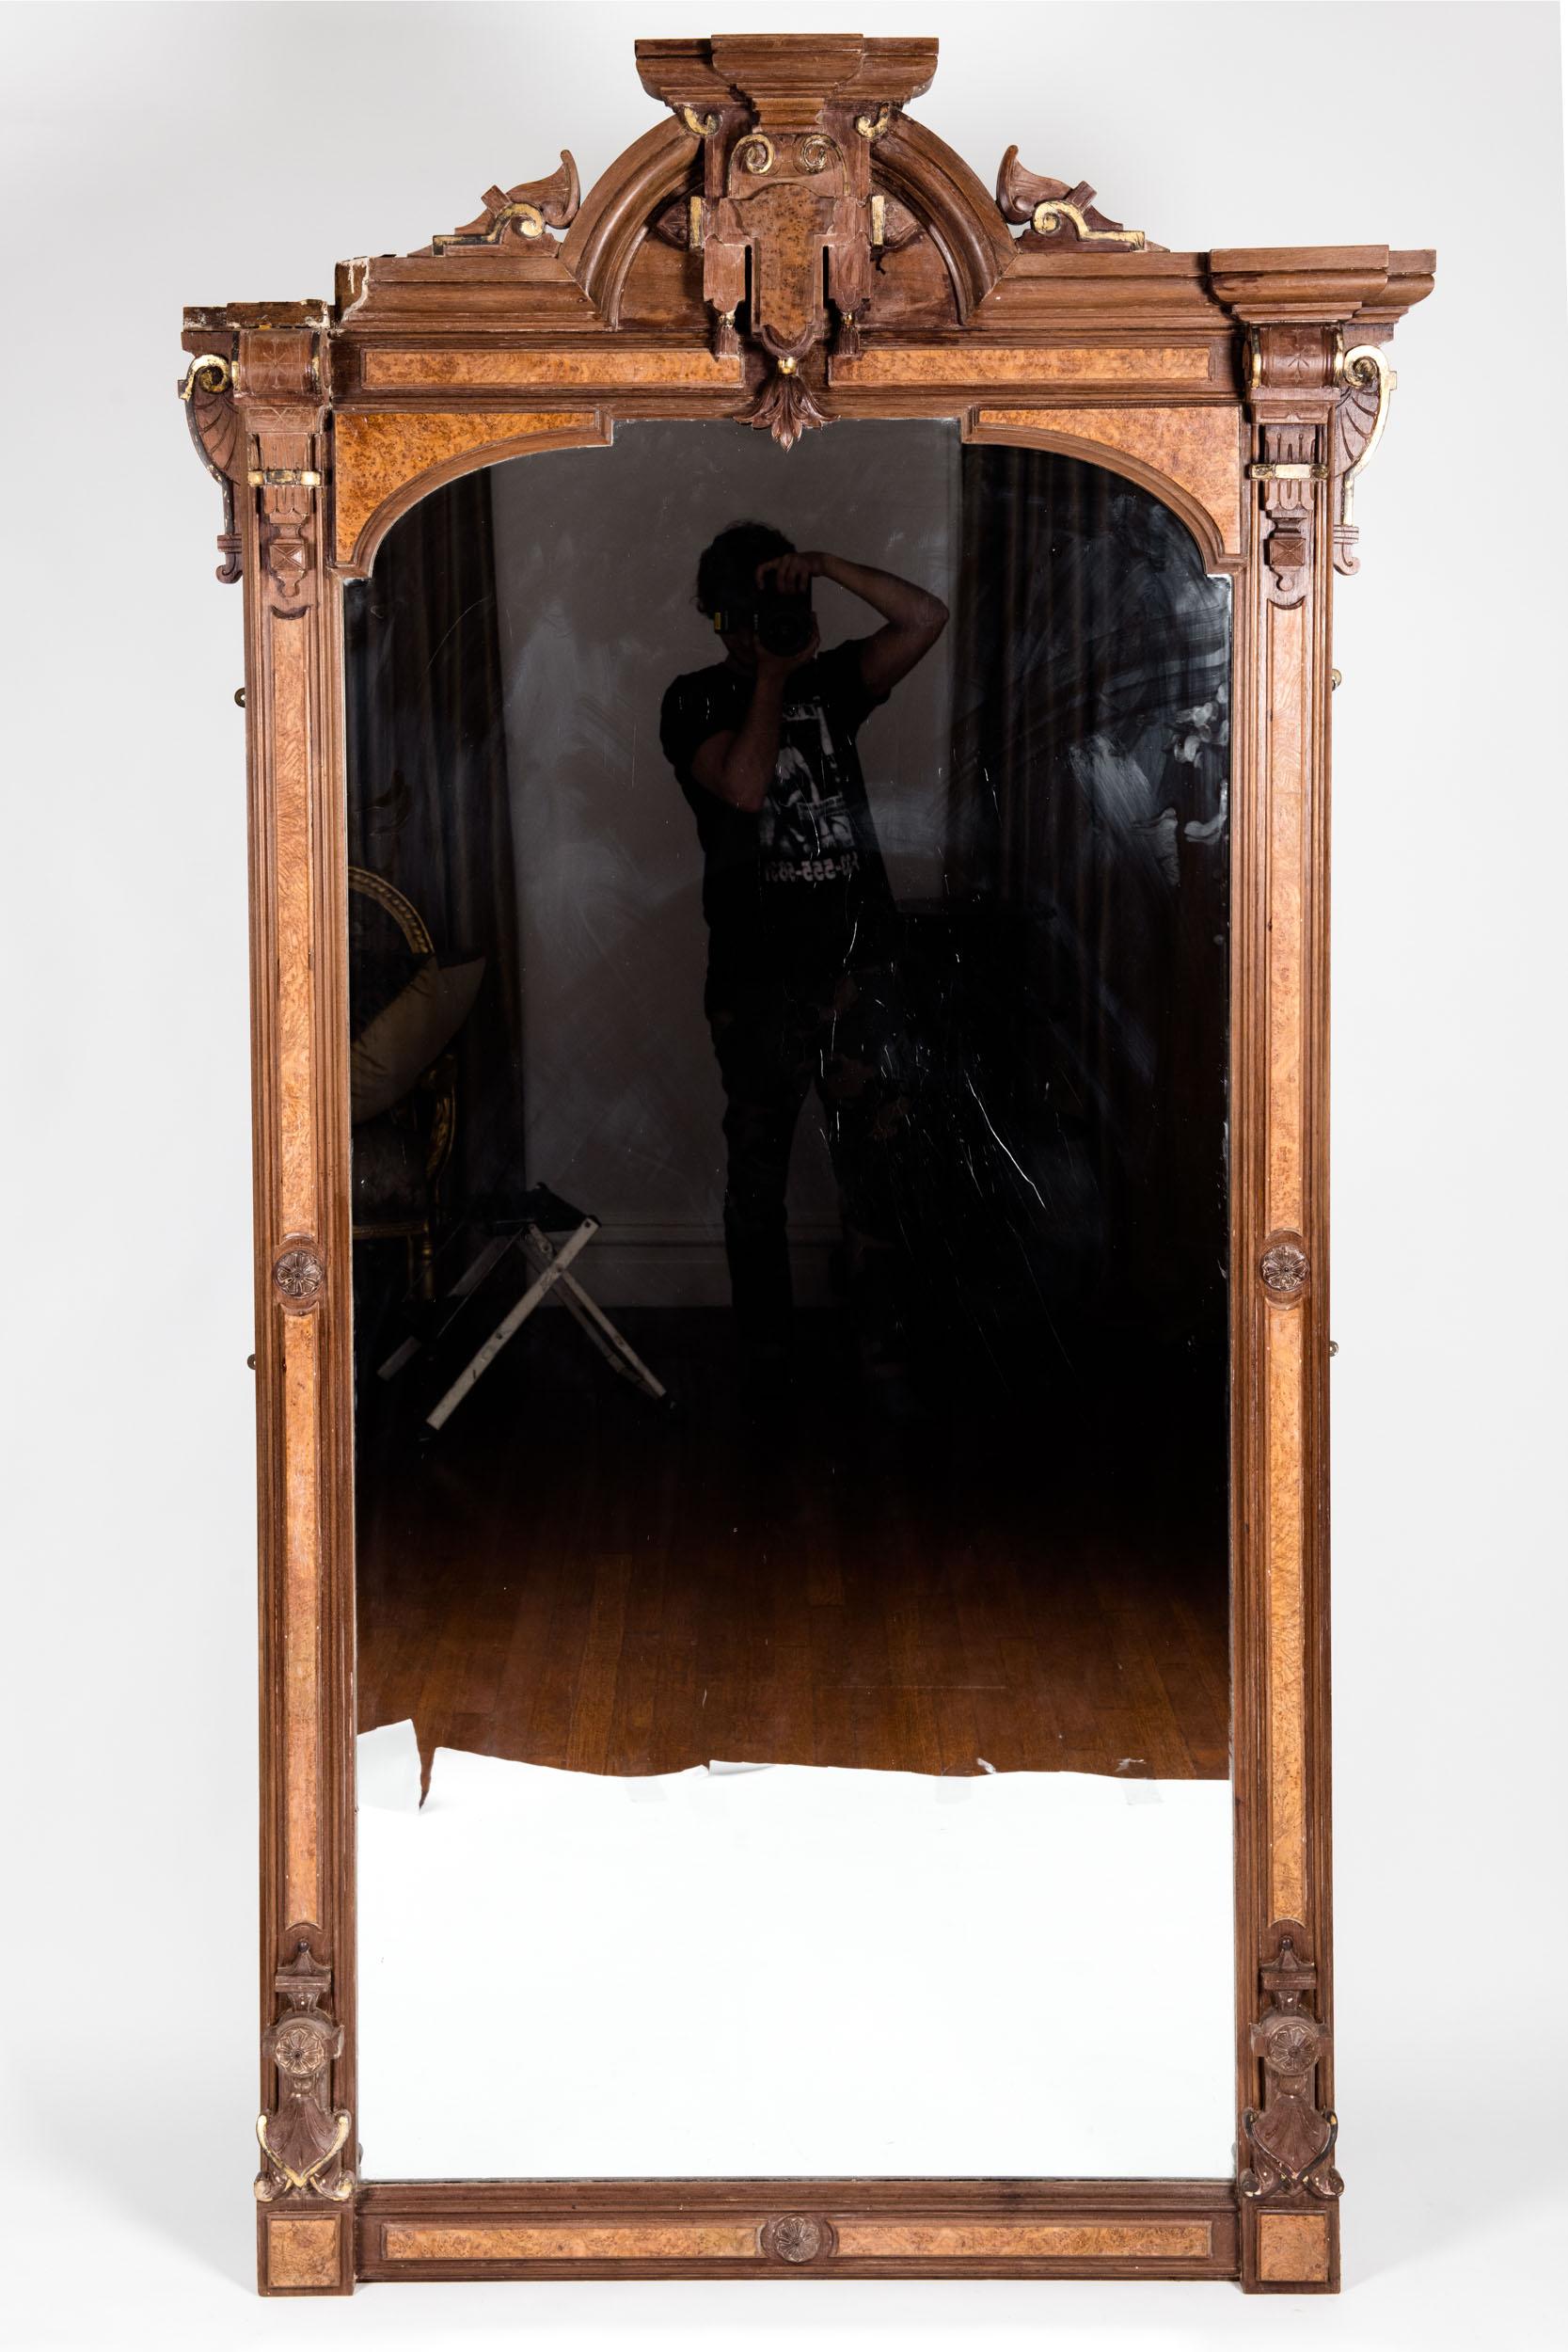 Antique Victorian burl wood pier mirror. The full length standing pier mirror is in good antique condition. Minor wear consistent with age / use. The mirror Stand about 83 inches high x 46 inches wide x 5 inches deep.